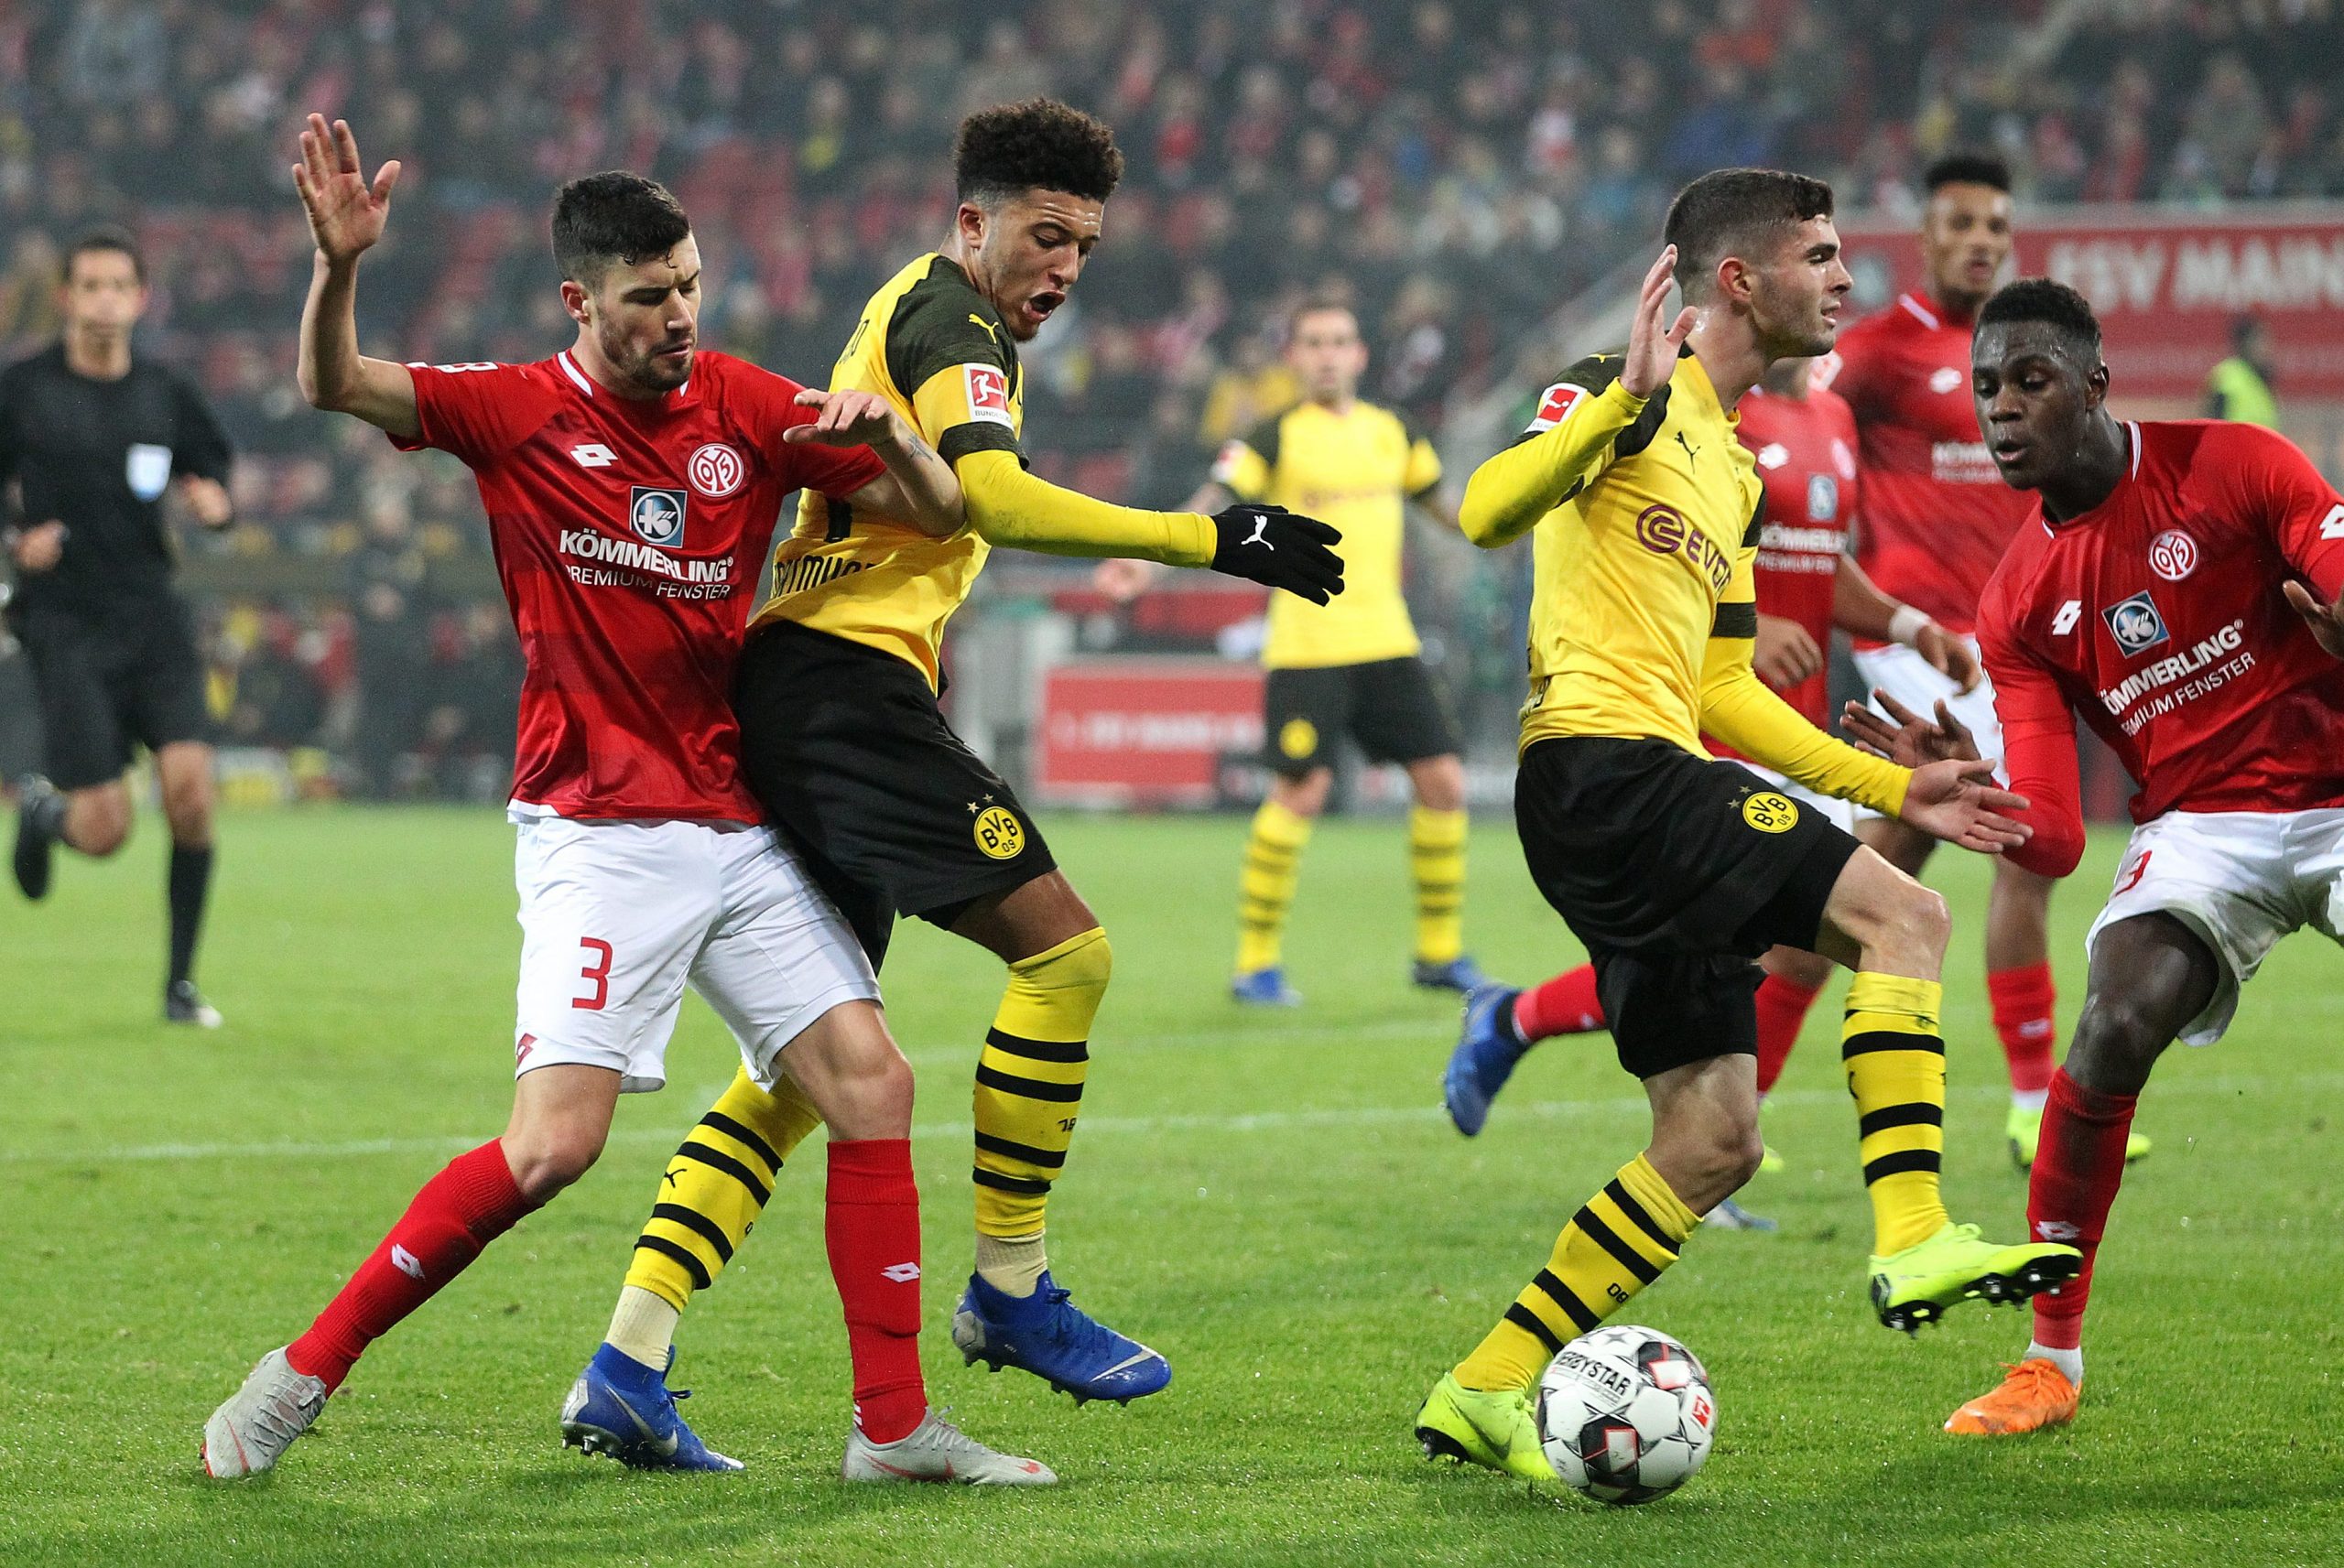 Christian Pulisic Is Very Good. It’s Just That Jadon Sancho Is Amazing.